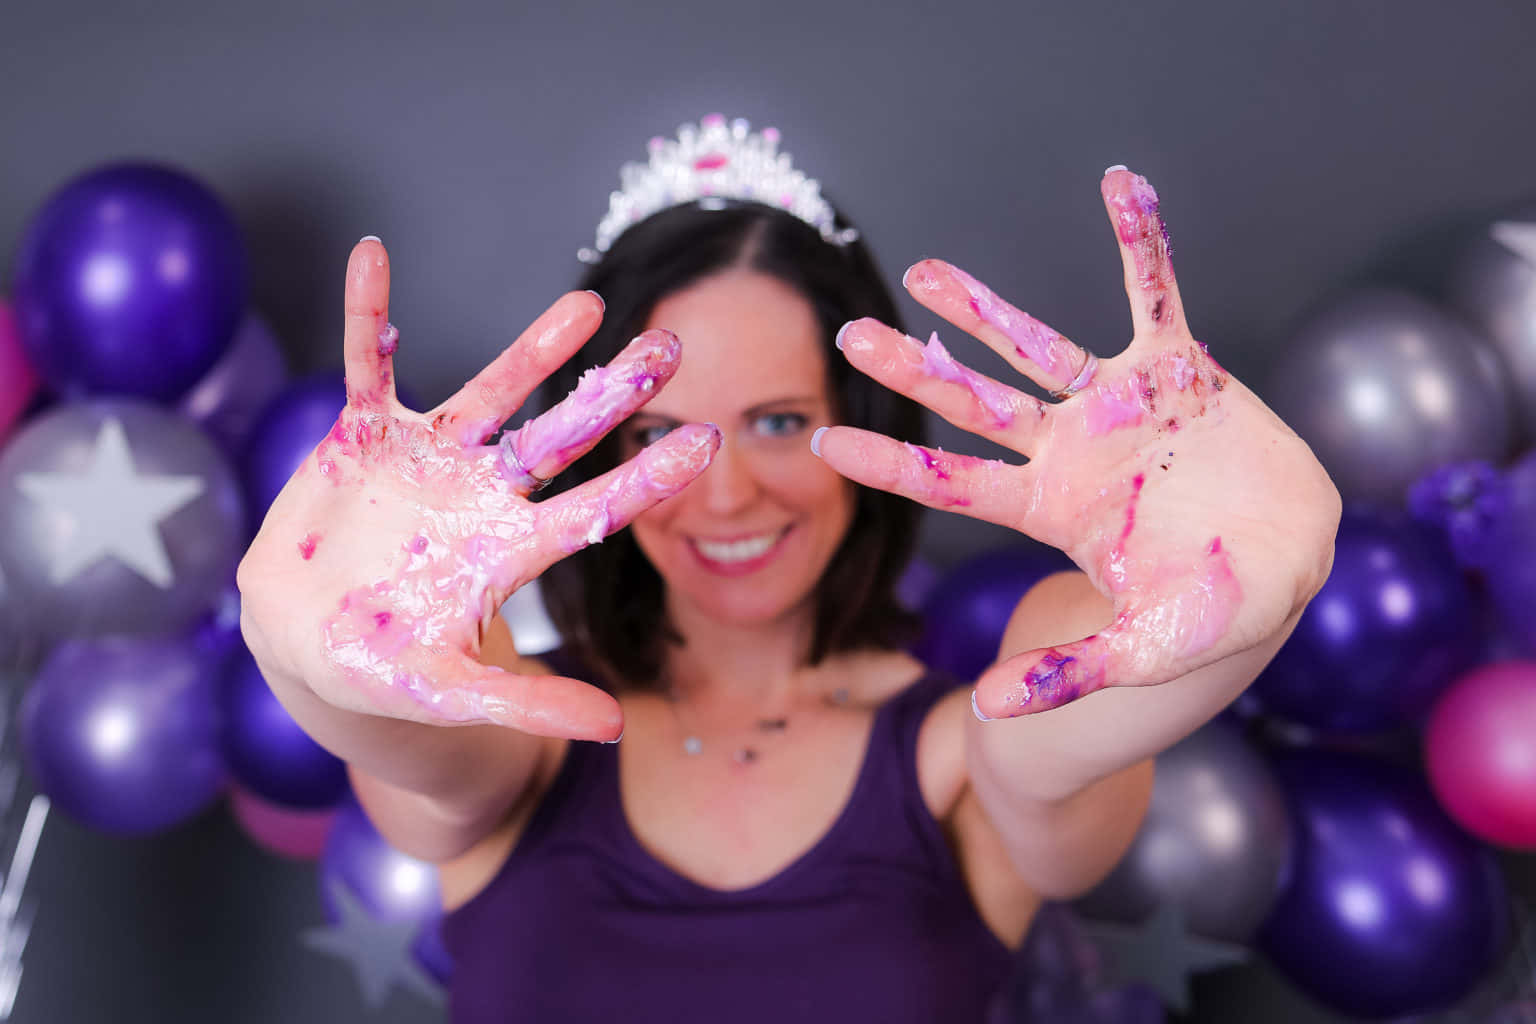 Woman With Cake Smash In Hand Pictures